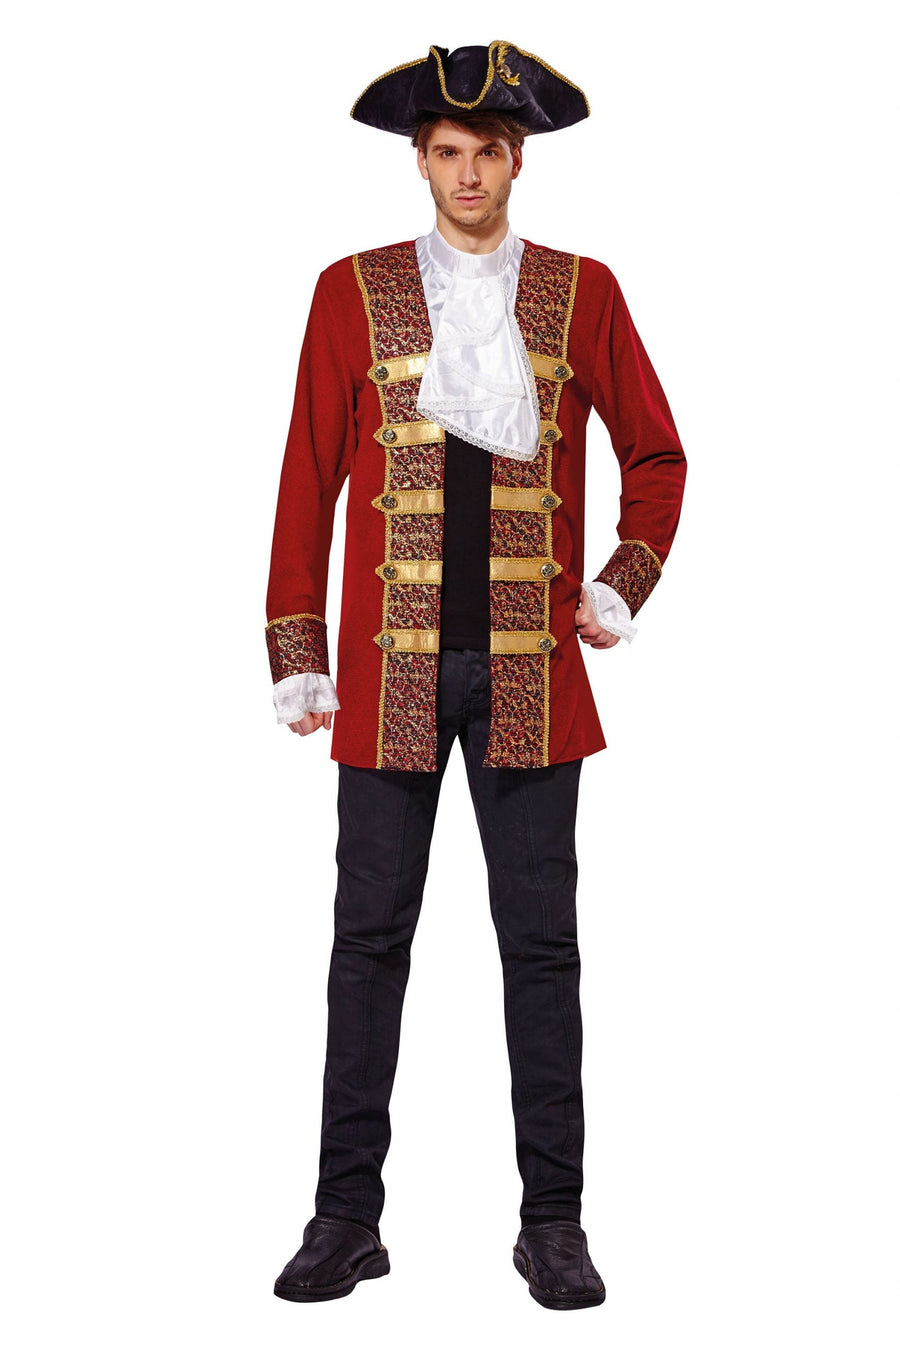 Pirate Coat Red With Attached Cuffs Jabot Adult Costume Chest Size 44"_1